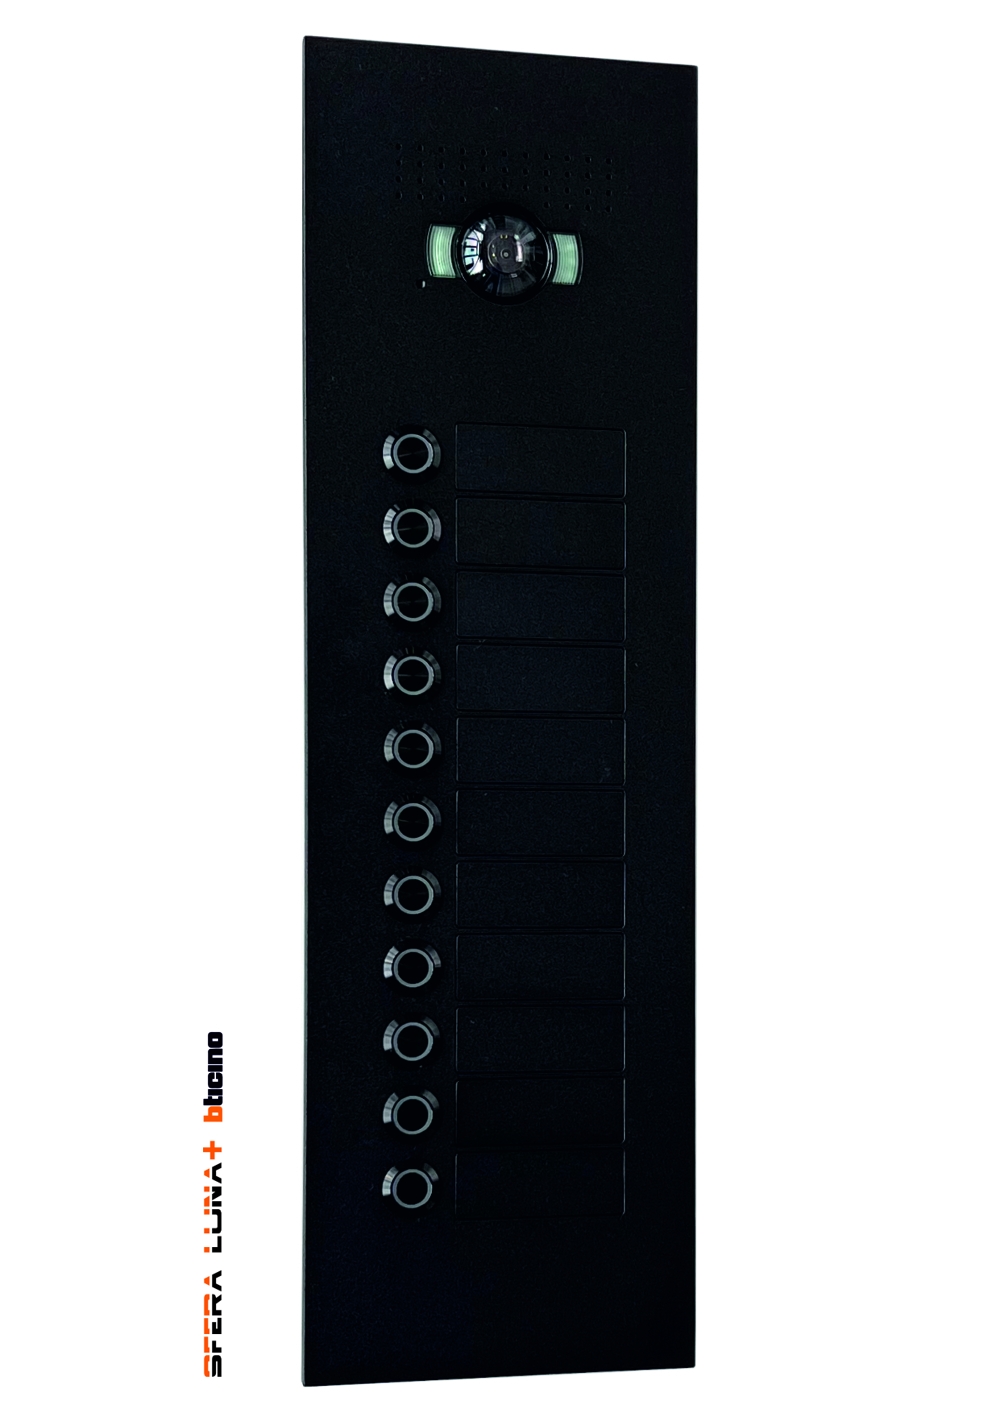 SFERA LUNA+11 Call Buttons for Video/audio door entry system Bticino